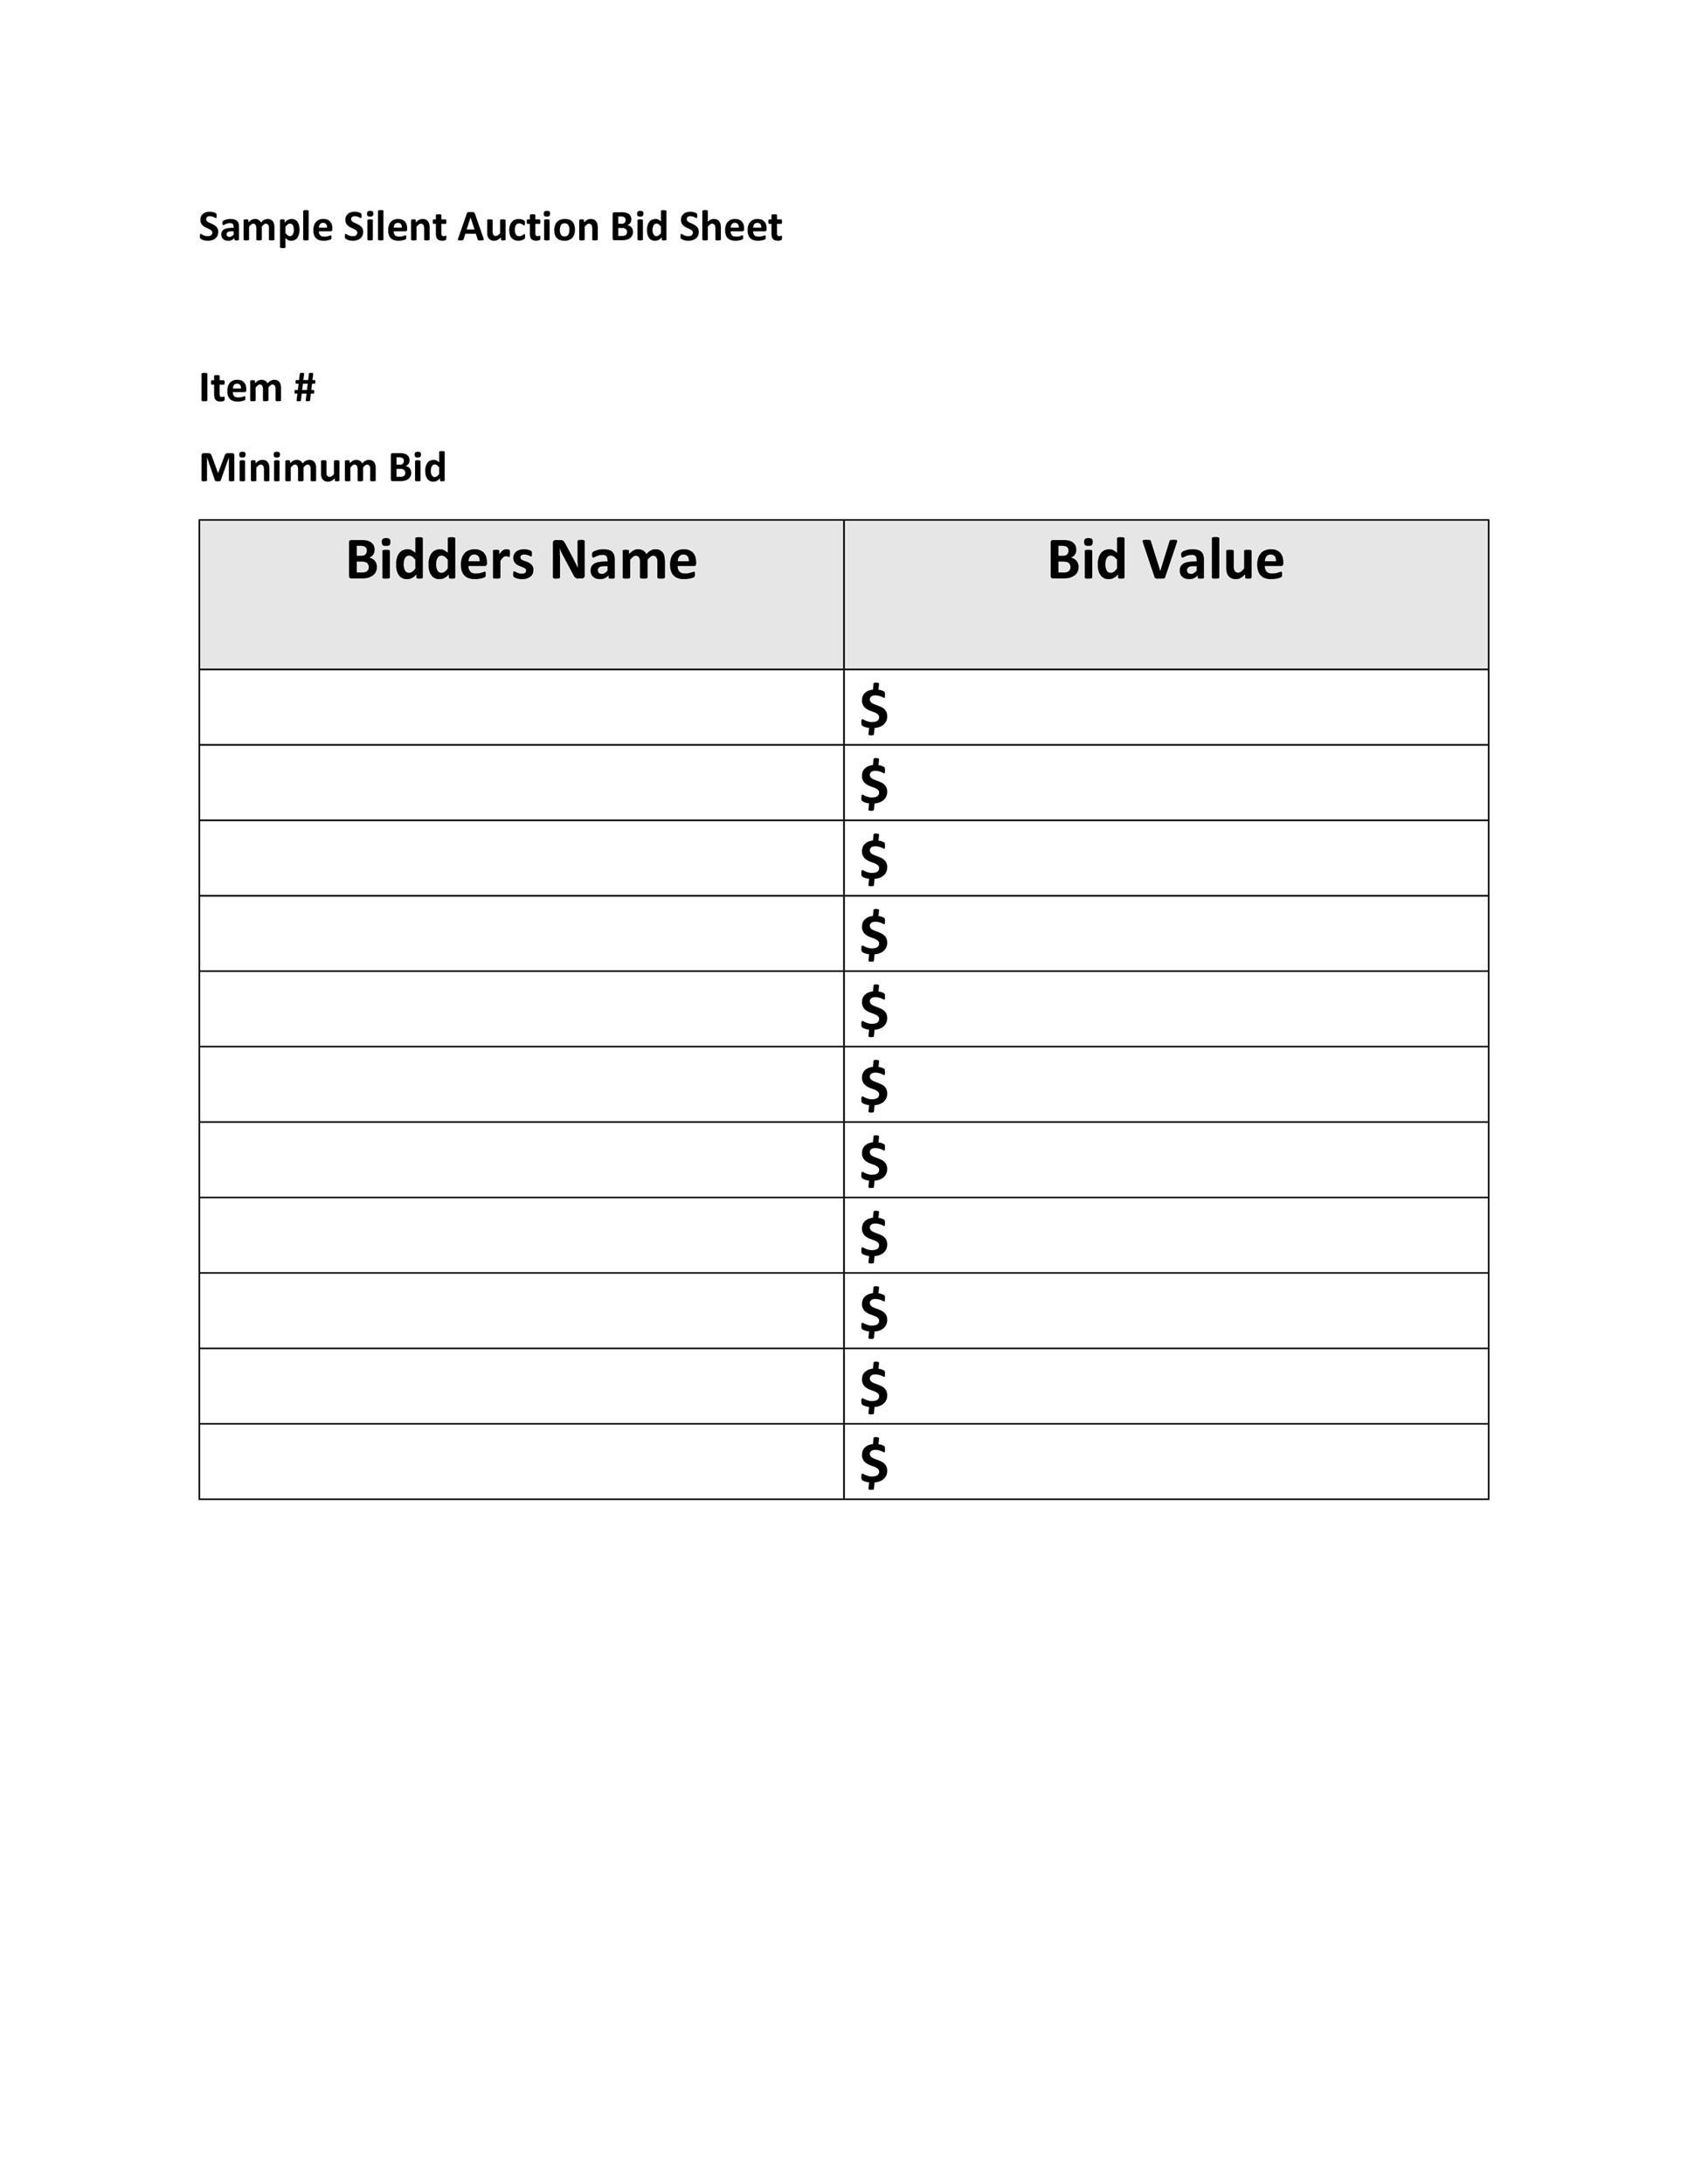 40+ Silent Auction Bid Sheet Templates [Word, Excel] ᐅ Template Lab